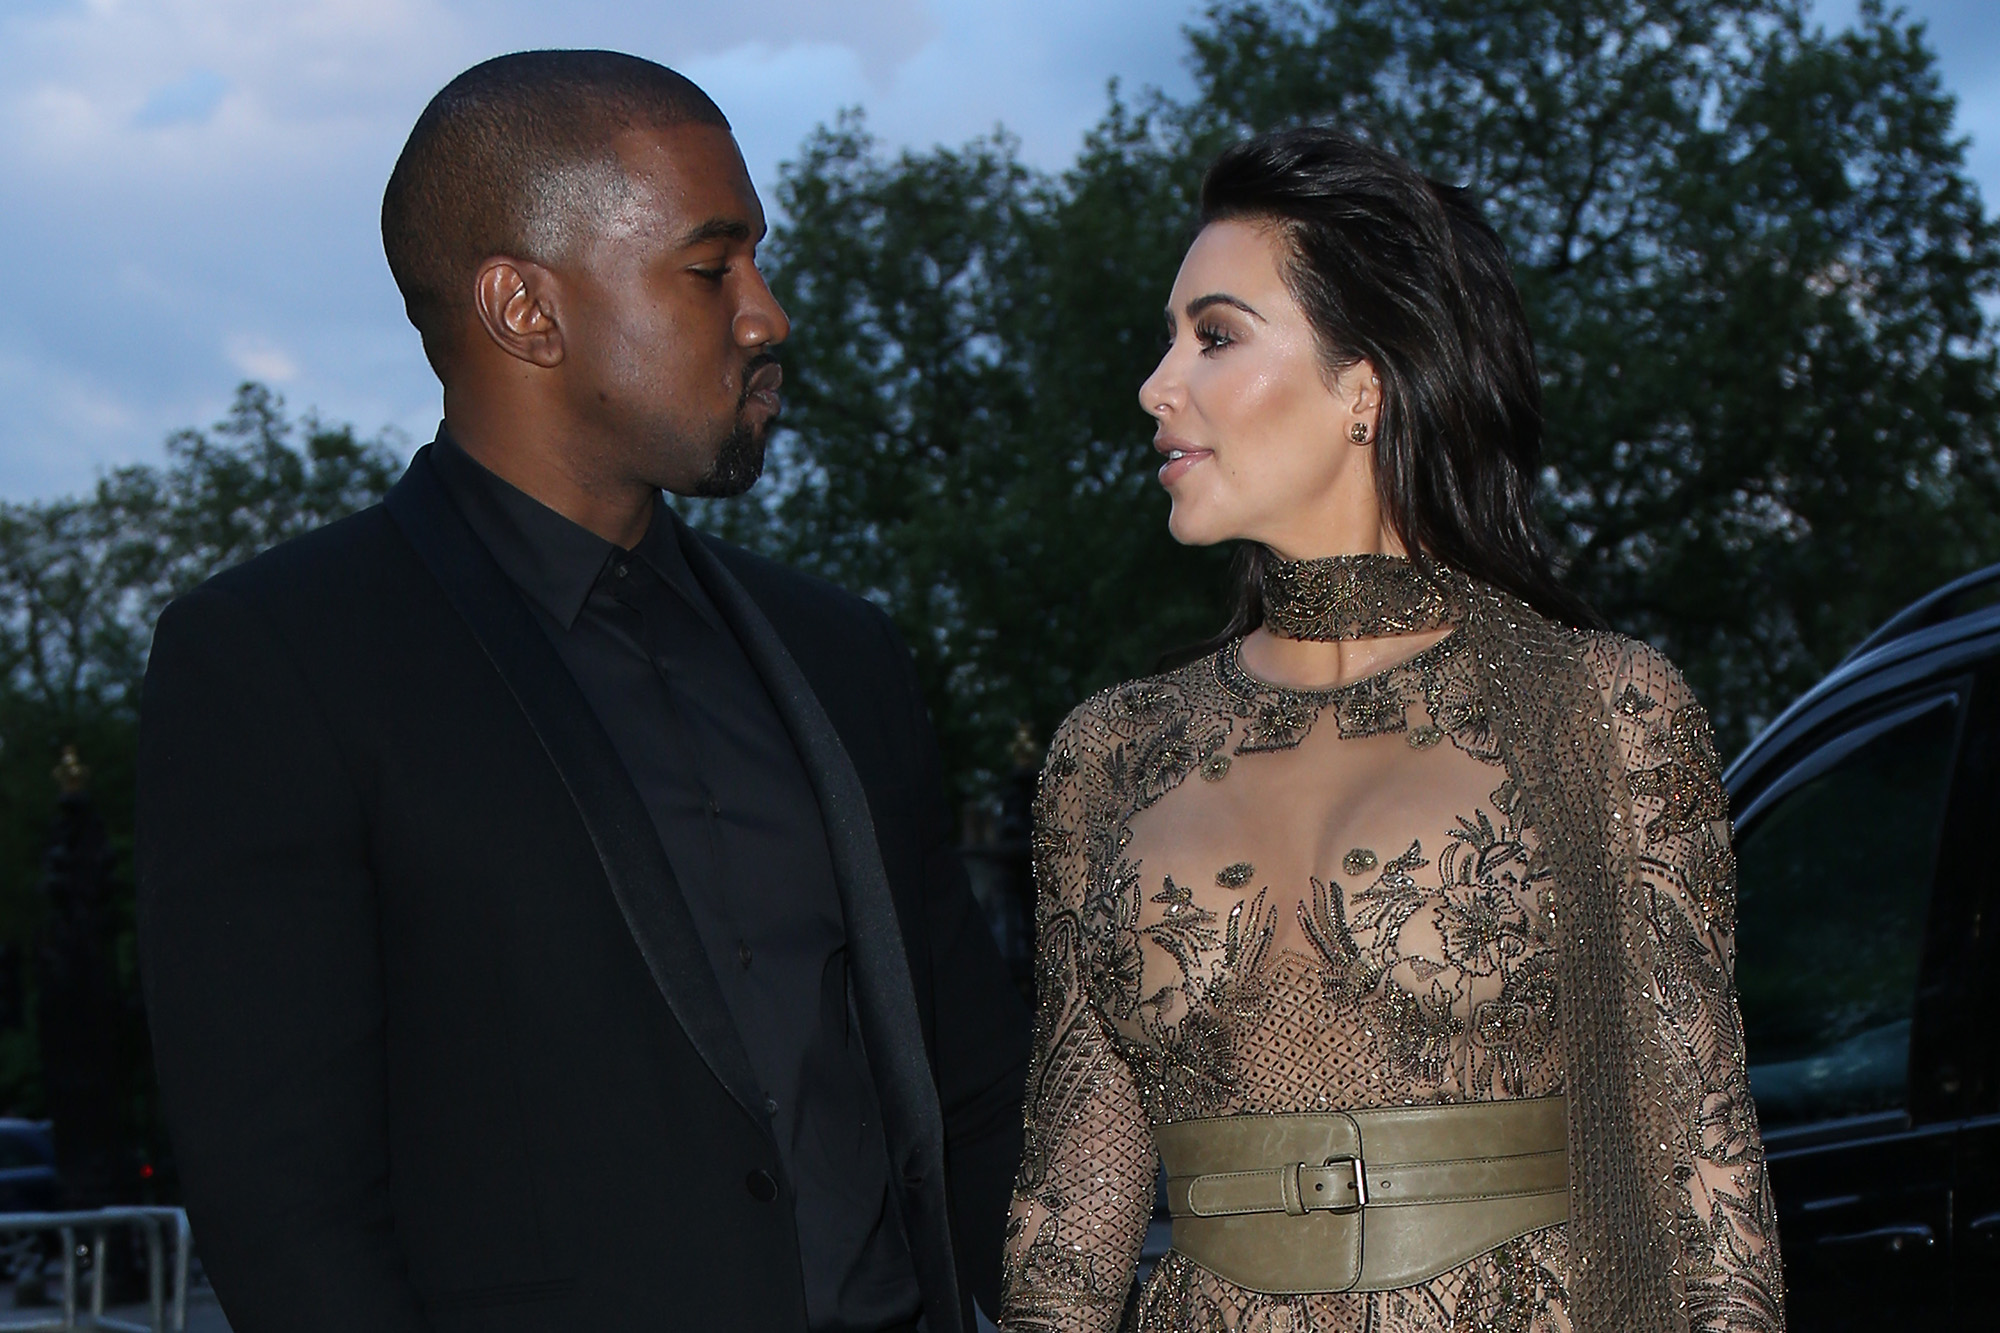 Kim Kardashian West and Kanye West attend the Vogue 100 Gala Dinner at the East Albert Lawn in Kensington Gardens on May 23, 2016 in London, England.  (Photo by Neil Mockford/GC Images) (Neil Mockford&mdash;GC Images)